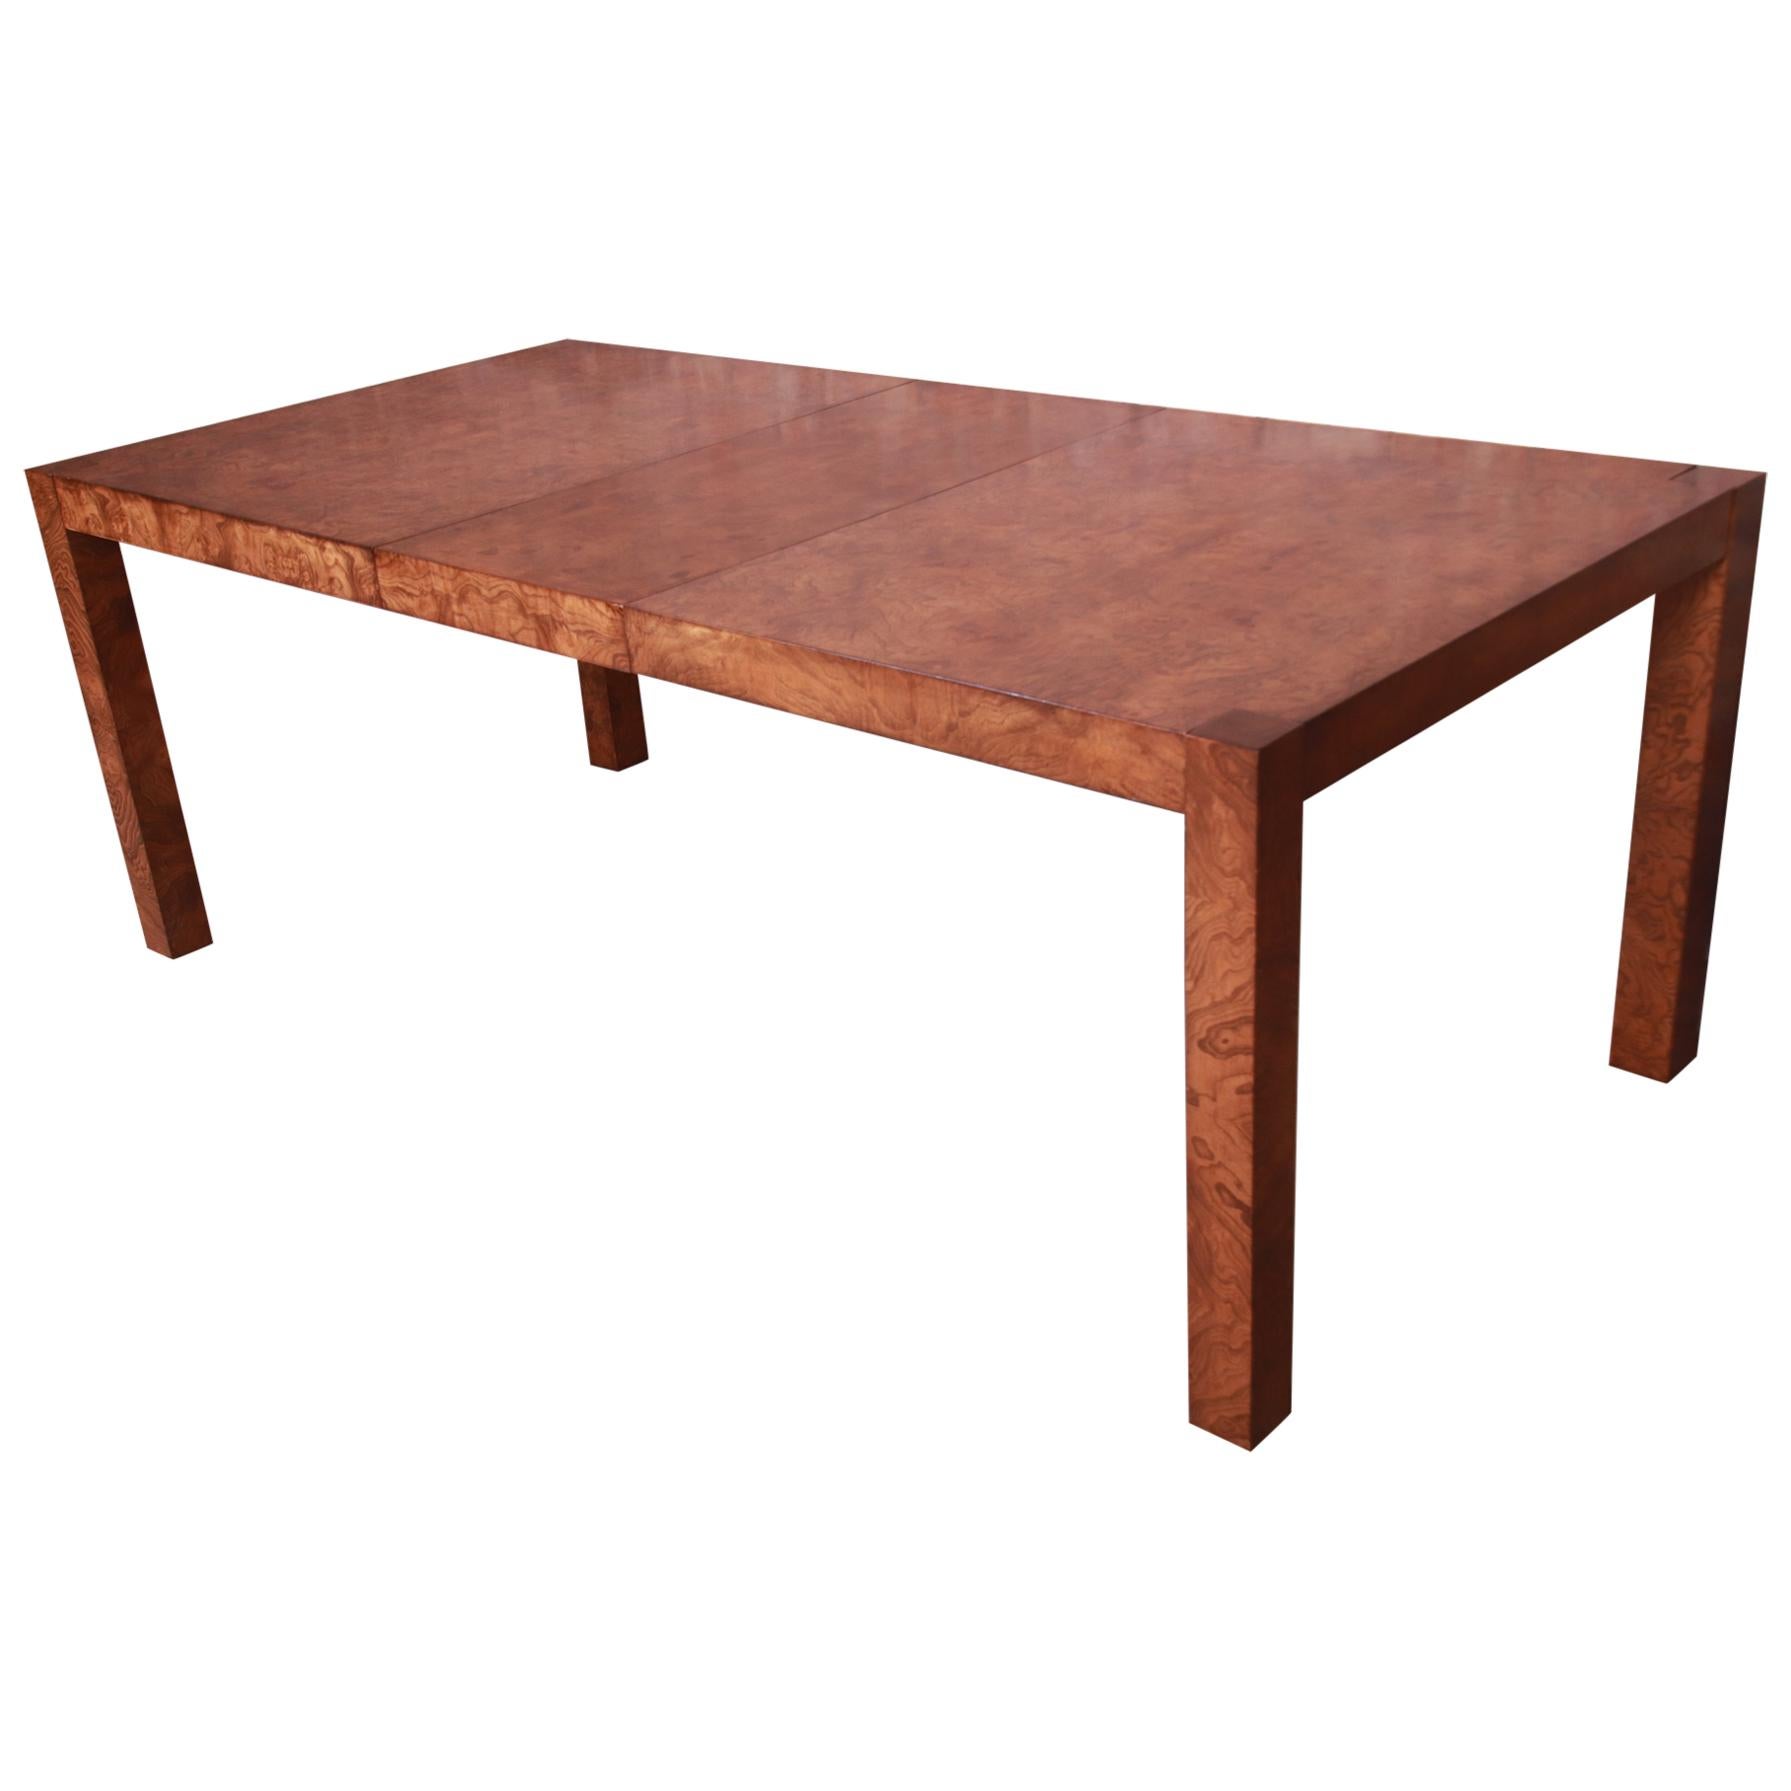 Milo Baughman Style Burl Wood Parsons Extension Dining Table by Lane, Refinished